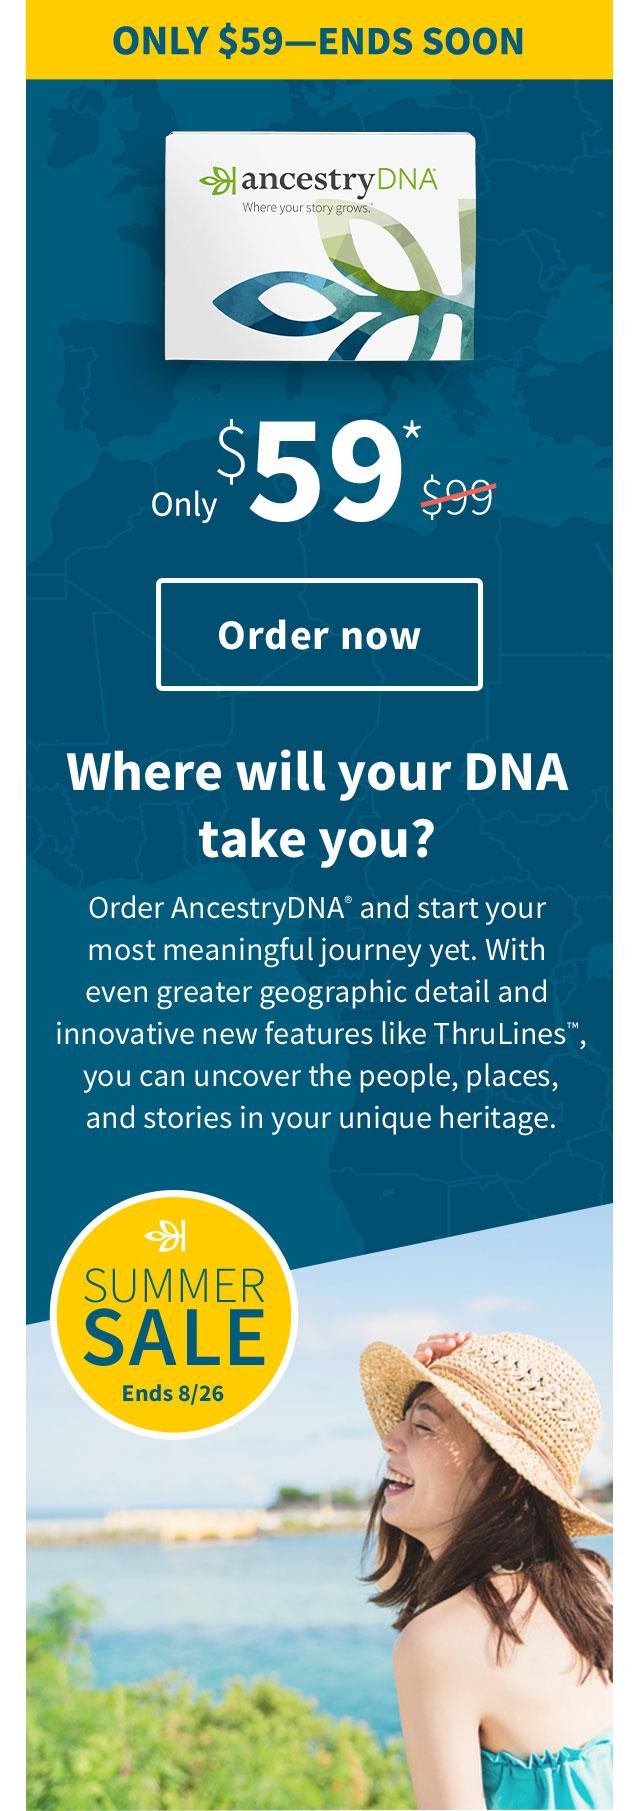 ONLY $59-ENDS SOON - Only $59* - Order now - Where will your DNA take you? - Order AncestryDNA and start your most meaningful journey yet. With even greater geographic detail and innovative new features like ThruLines™, you can uncover the people, places, and stories in your unique heritage.